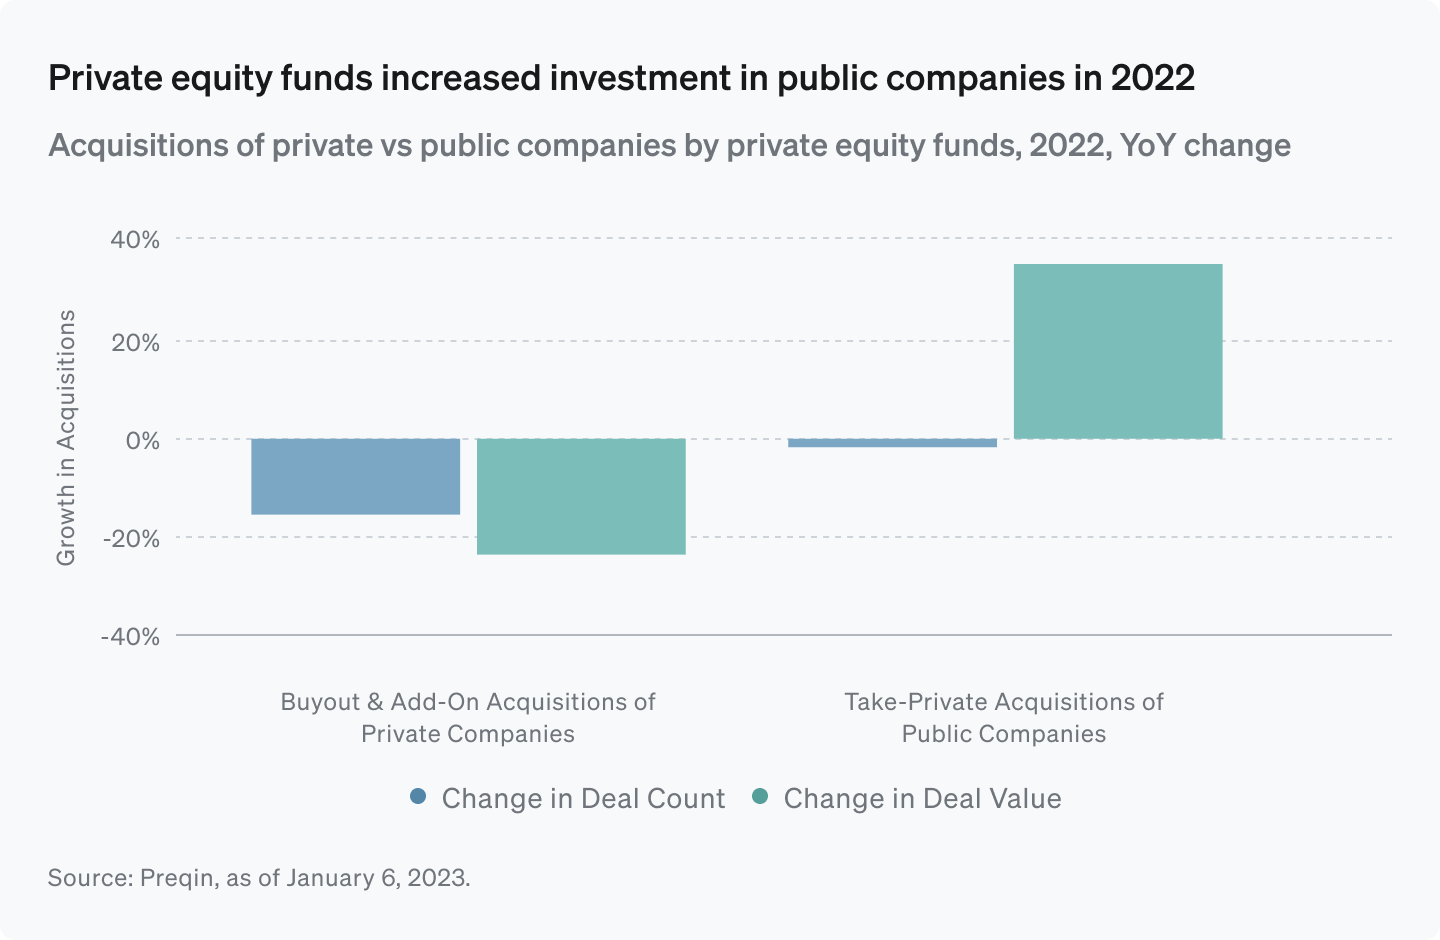 Private equity funds increased investment in public companies in 2022